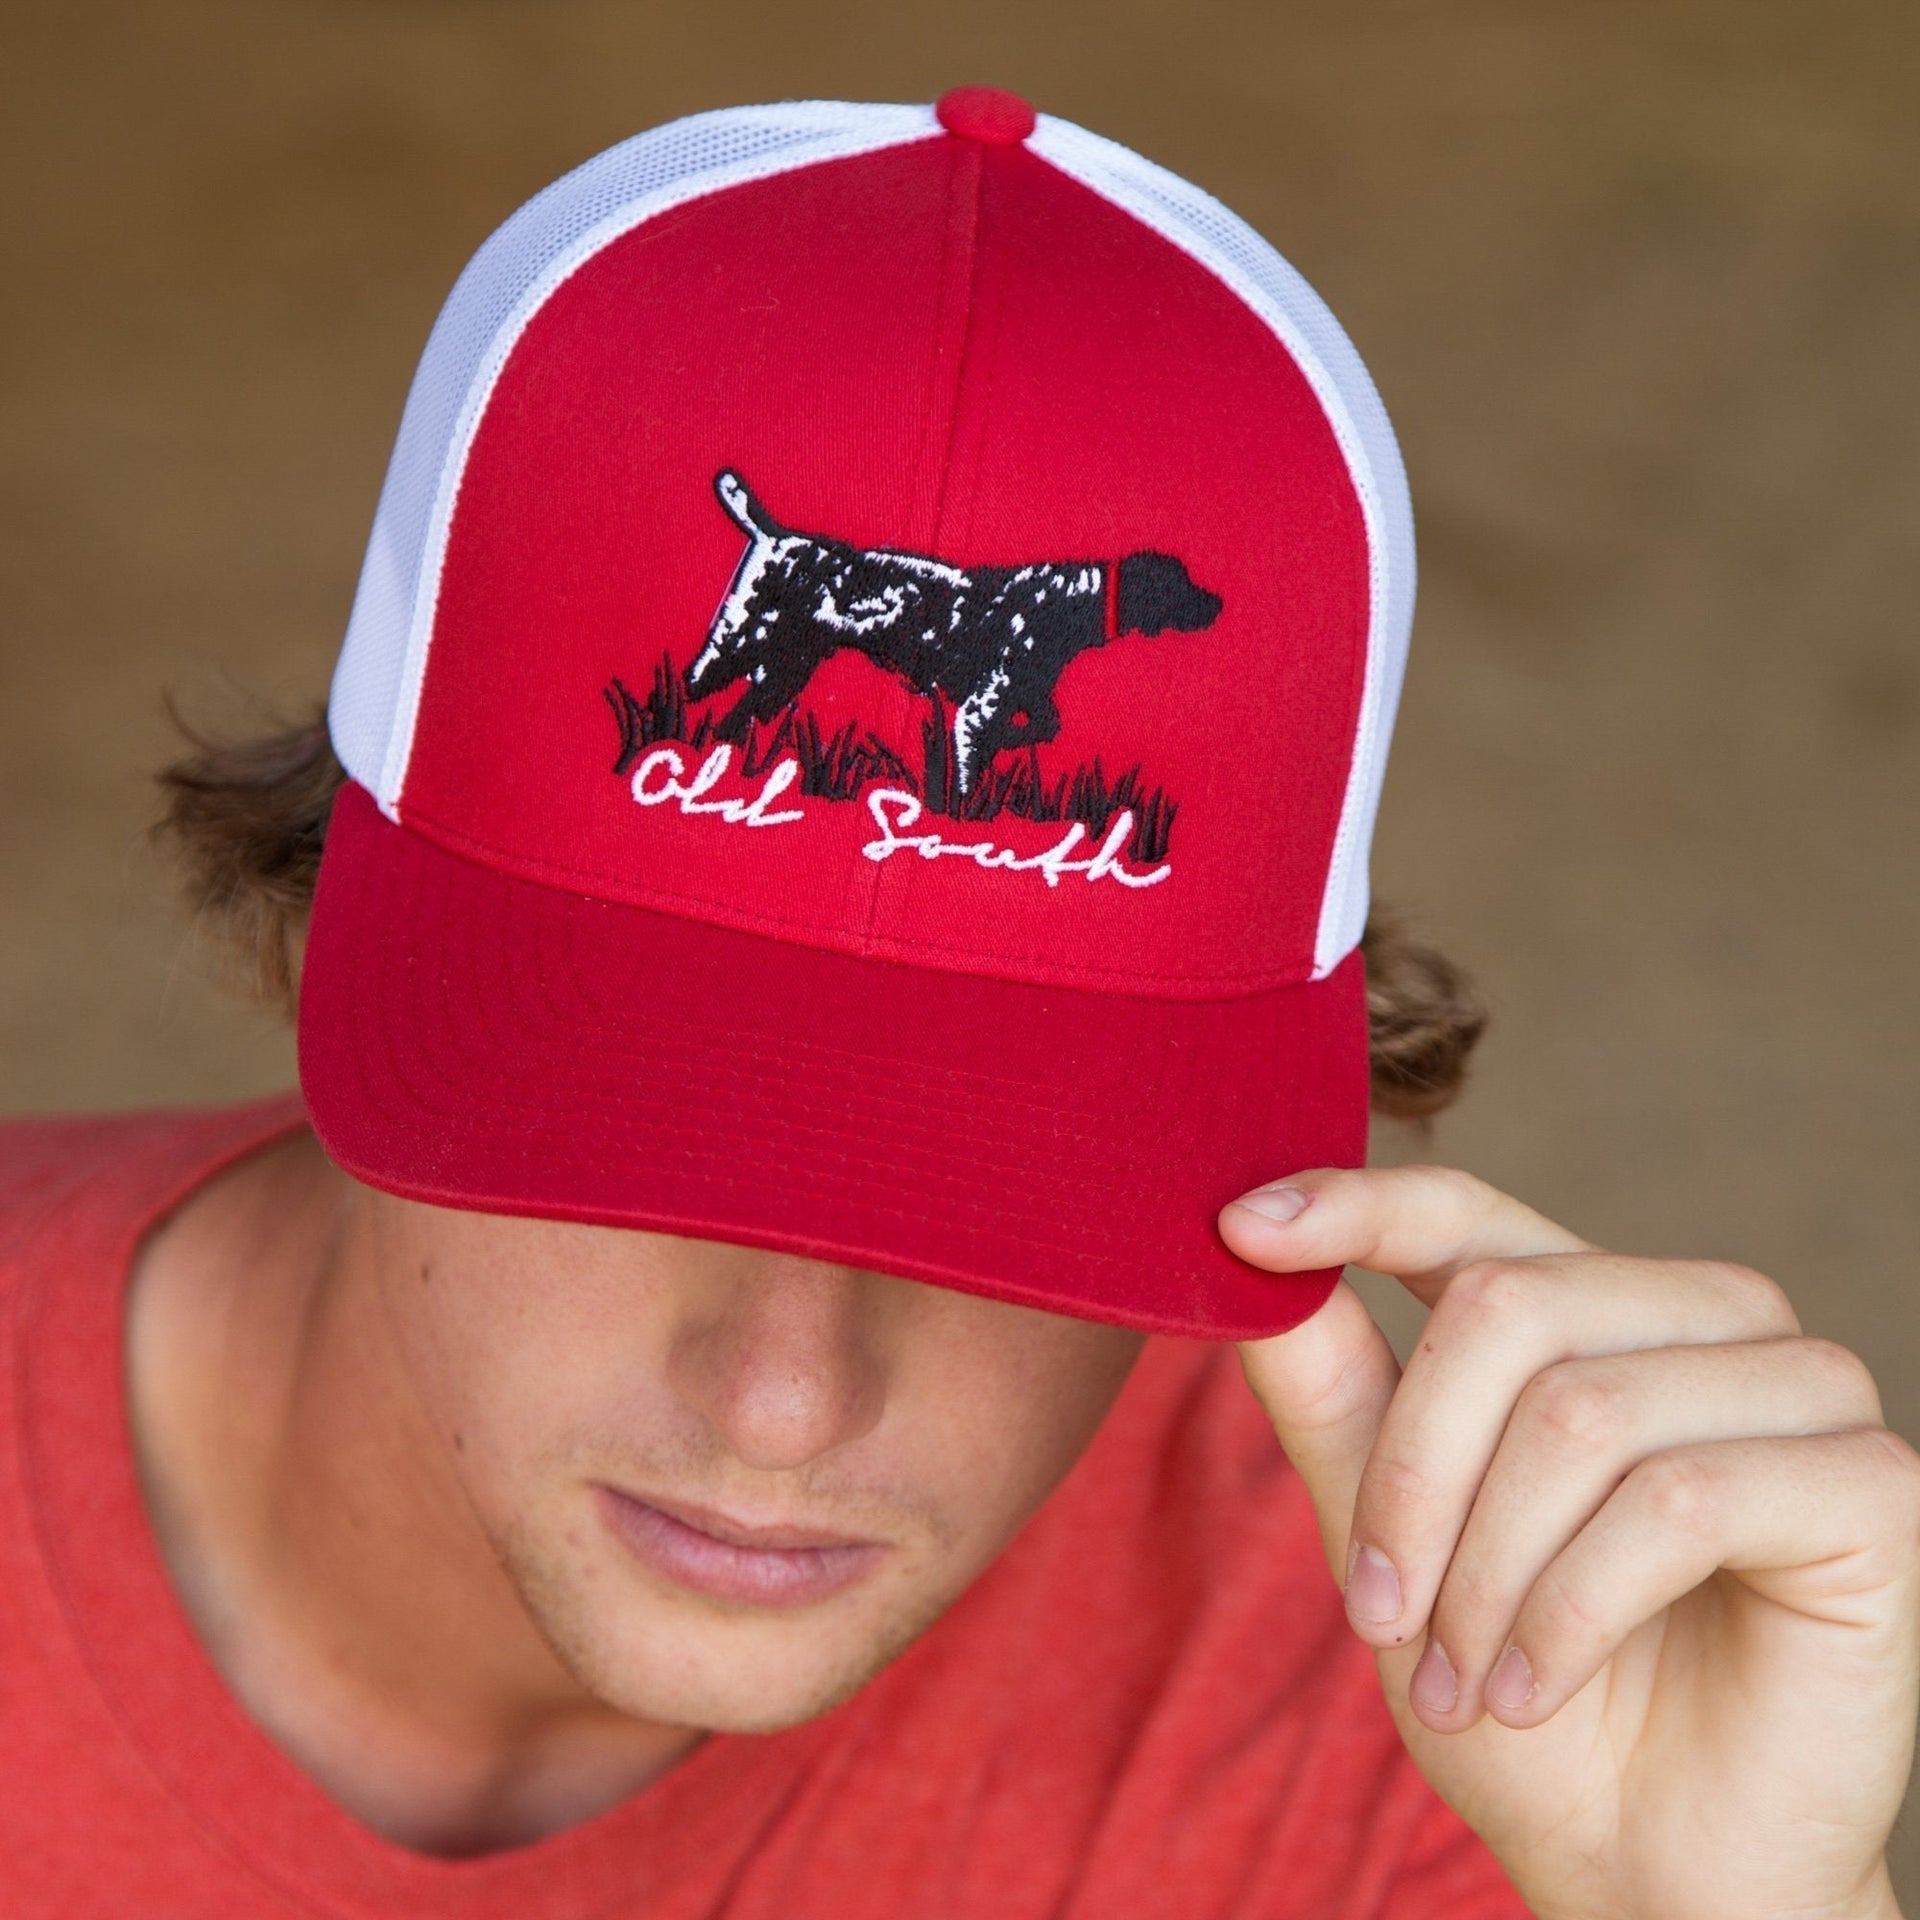 Pointer - Trucker Hat – Old South Apparel